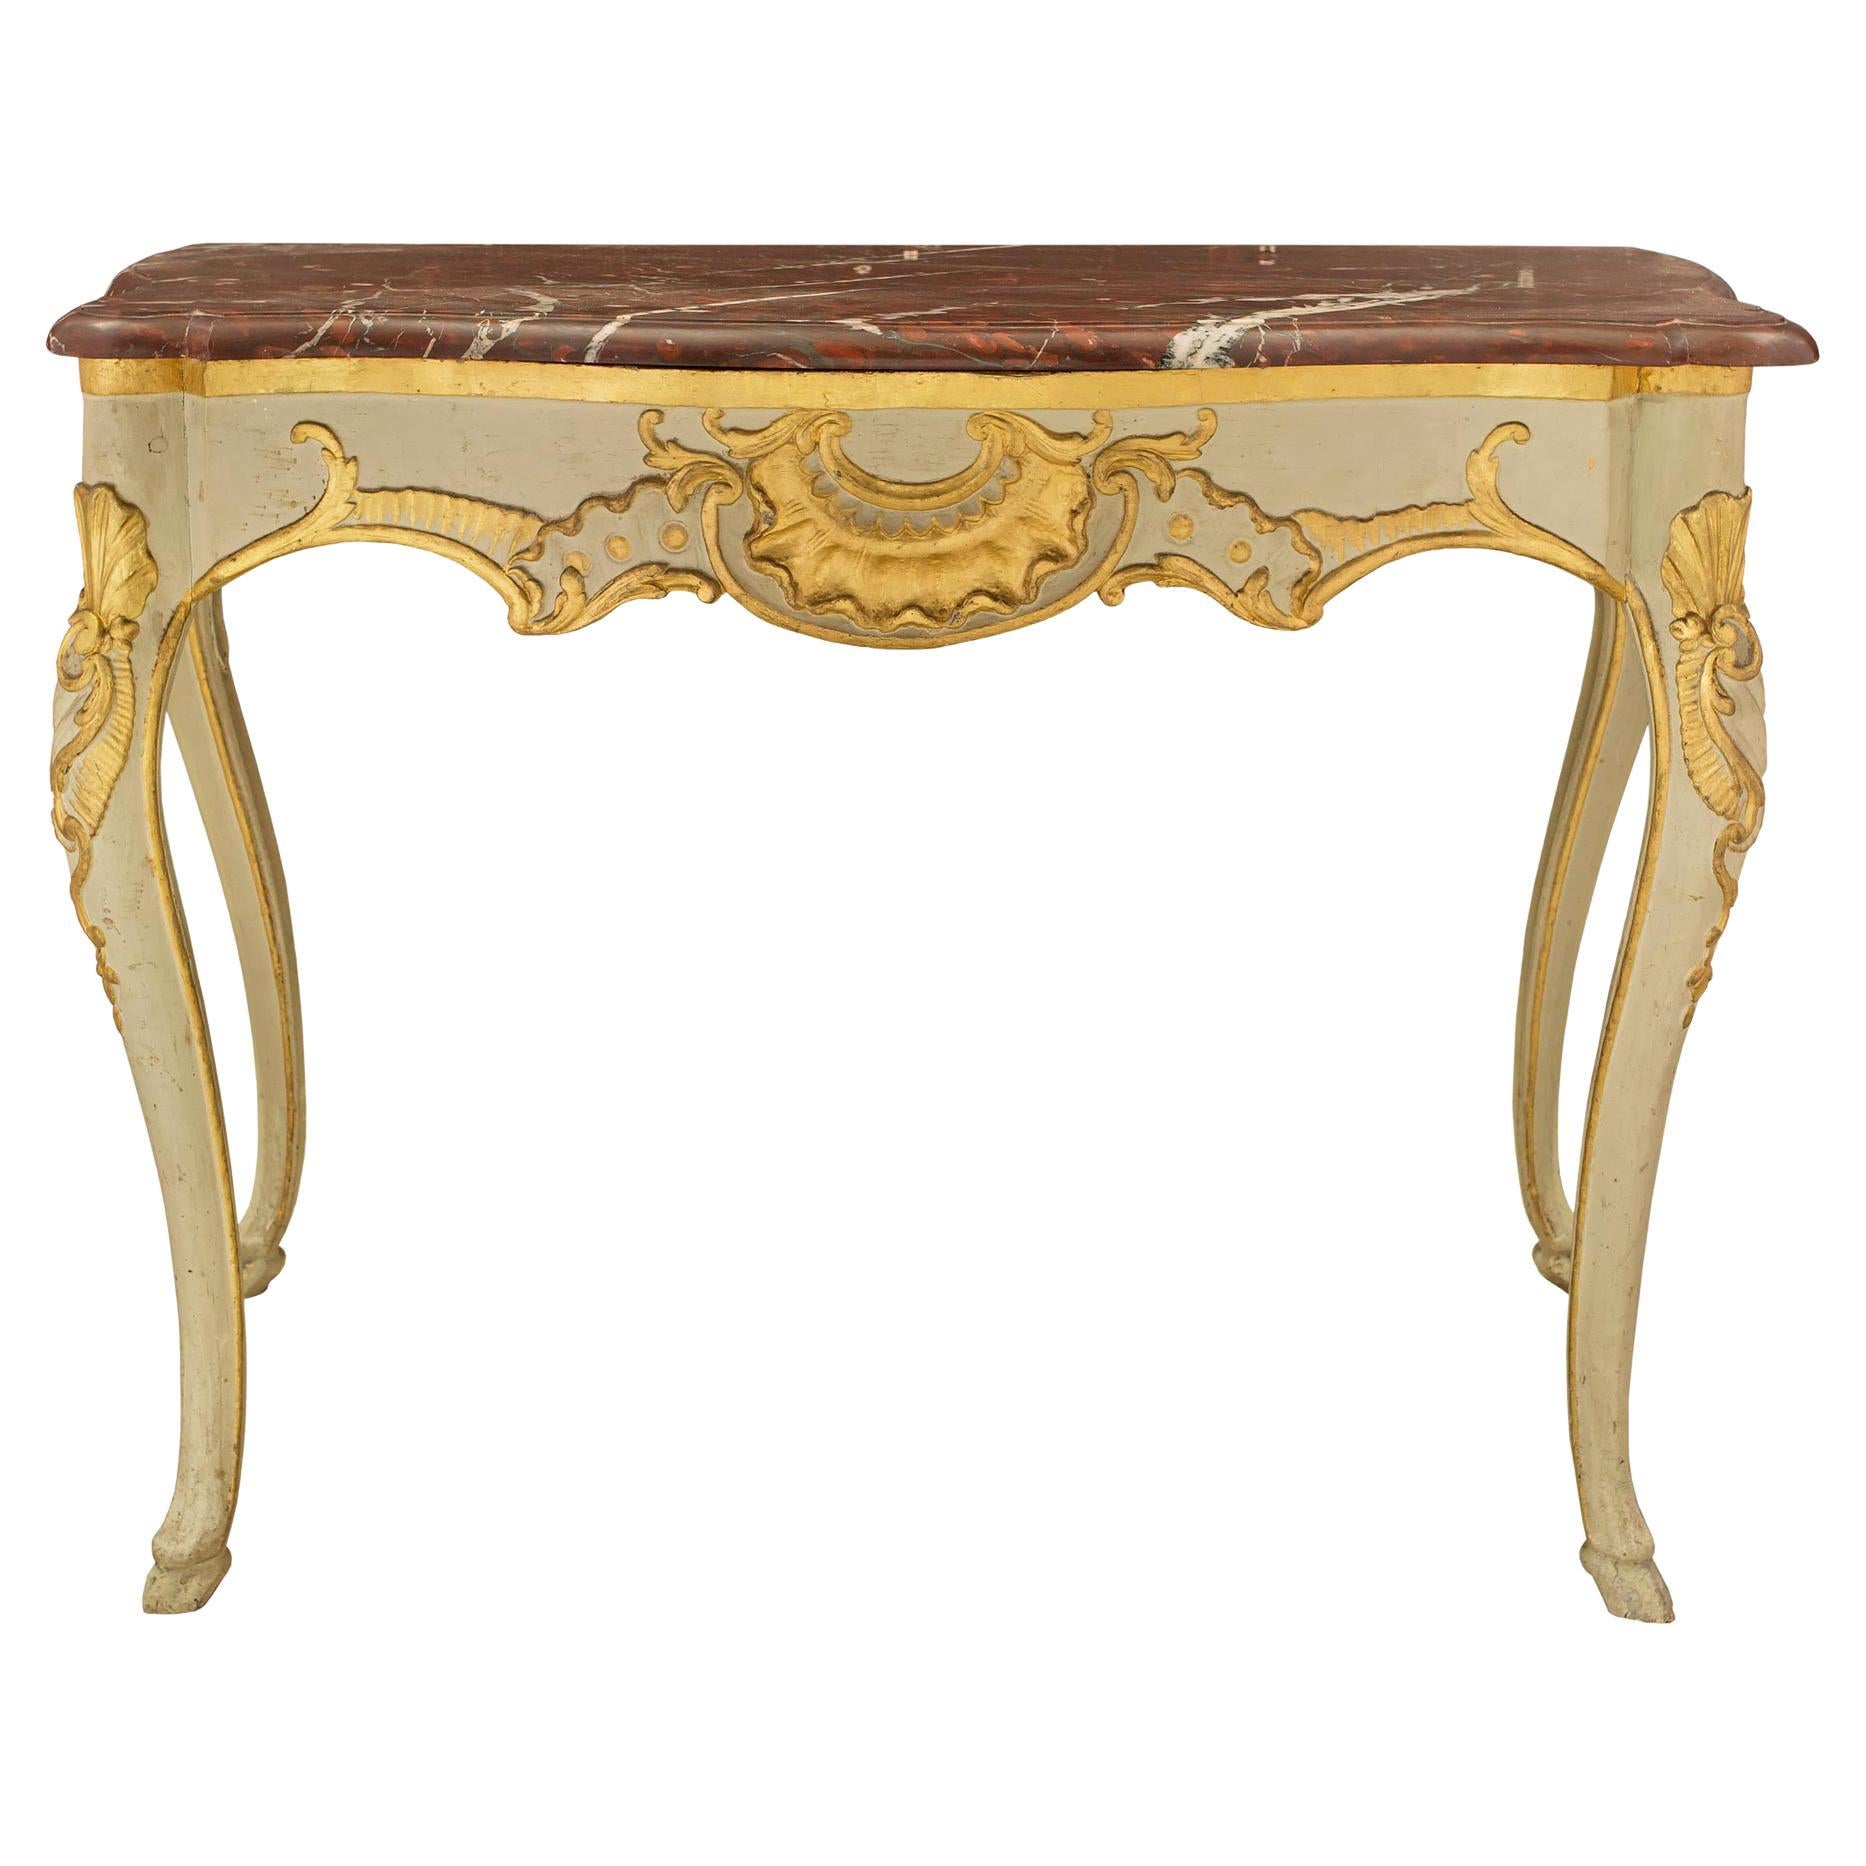 Country French 18th Century Régence Period Painted and Gilt Console